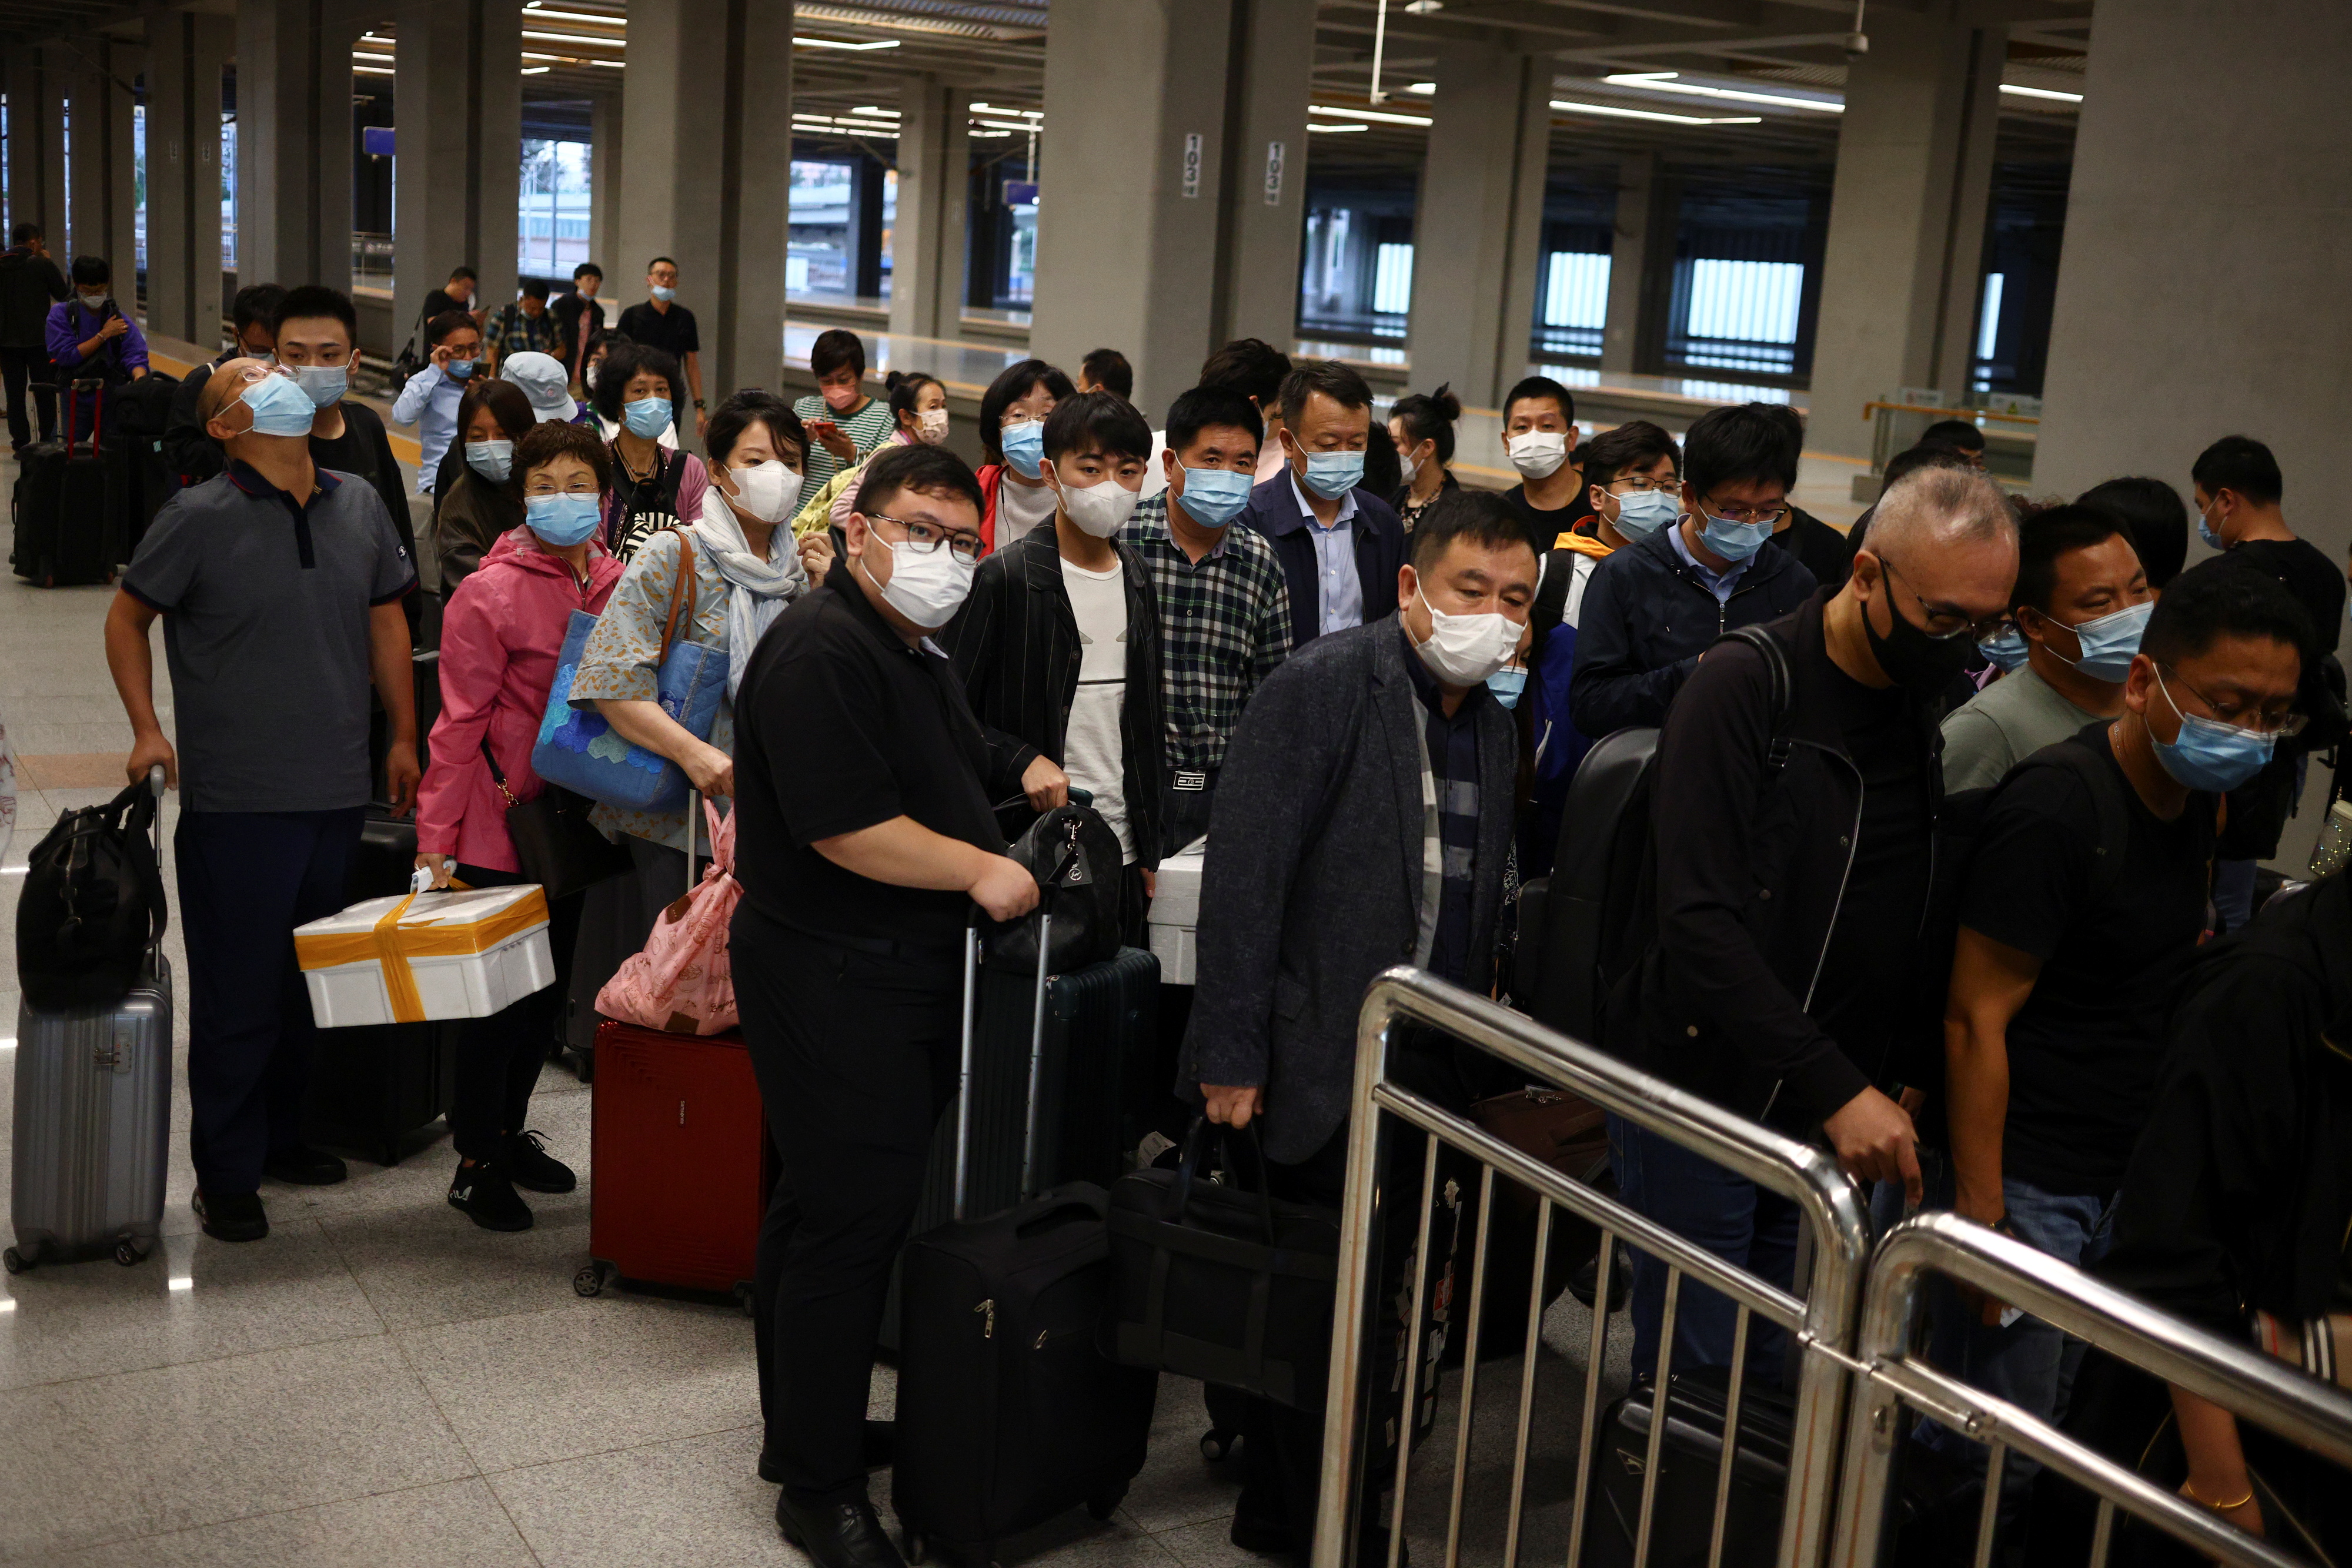 Travellers arrive at a train station ahead of China's upcoming Golden Week holiday following the coronavirus disease (COVID-19) outbreak, in Beijing